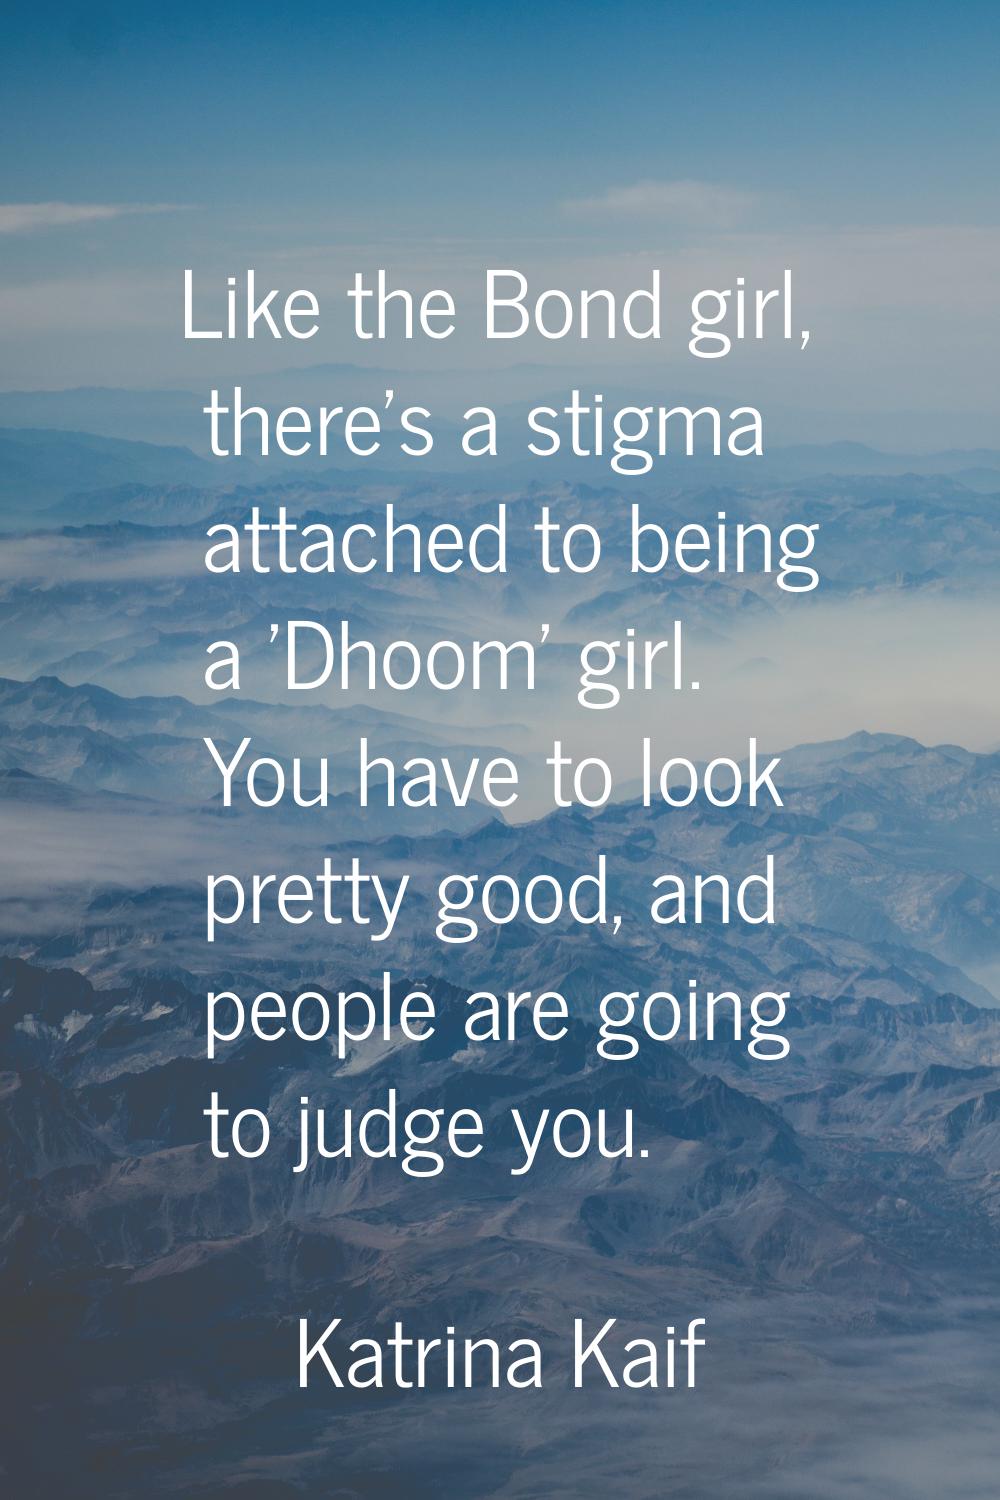 Like the Bond girl, there's a stigma attached to being a 'Dhoom' girl. You have to look pretty good